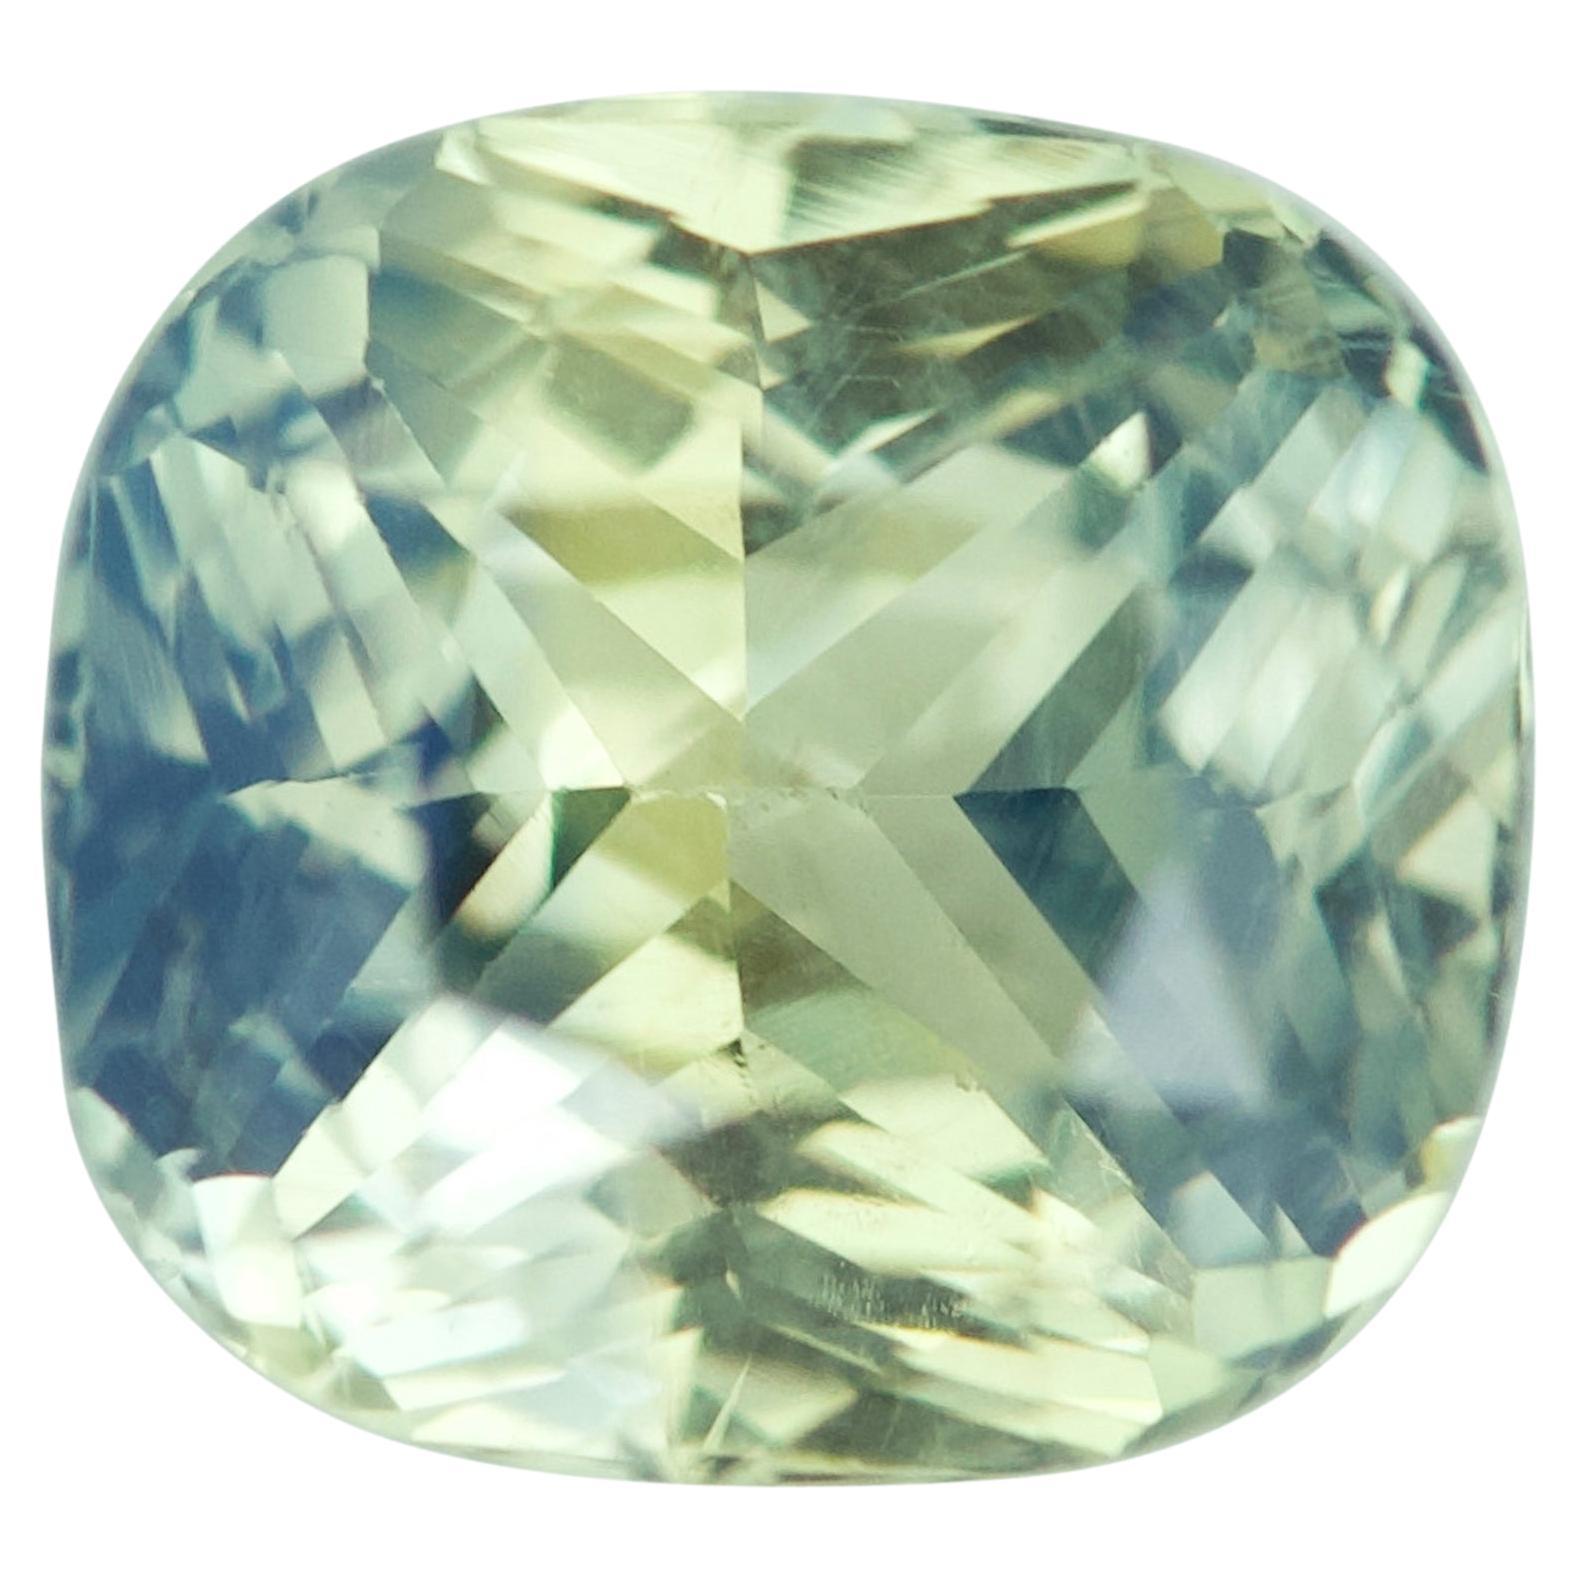 Light Teal Parti Sapphire 1.56 Ct Cushion Natural Unheated, Loose Gemstone For Sale